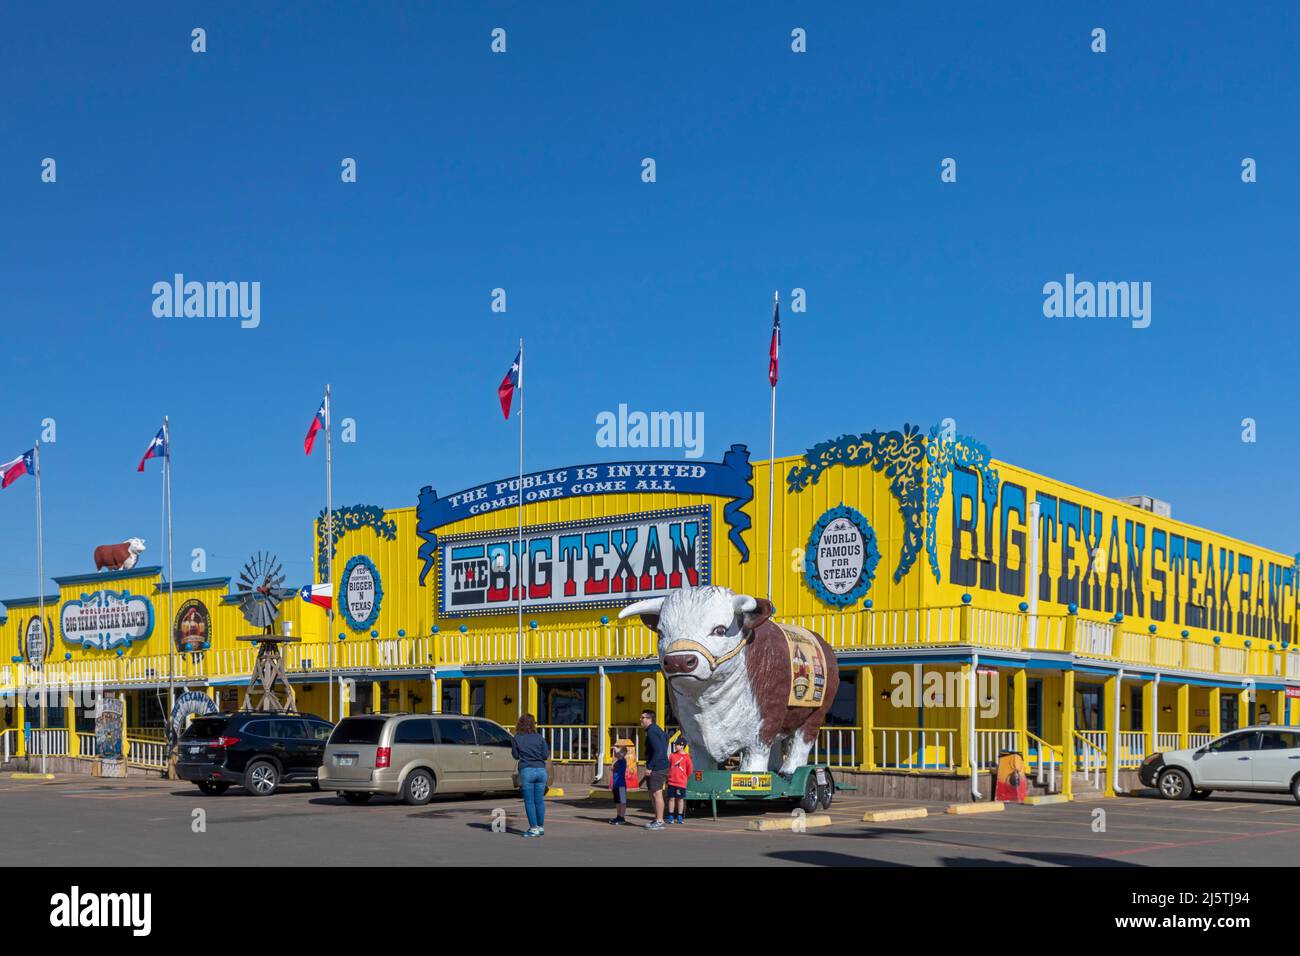 Amarillo, Texas - The Big Texan Steak Ranch. The restaurant offers a free 72-ounce steak to customers who can eat it all, including side dishes, withi Stock Photo